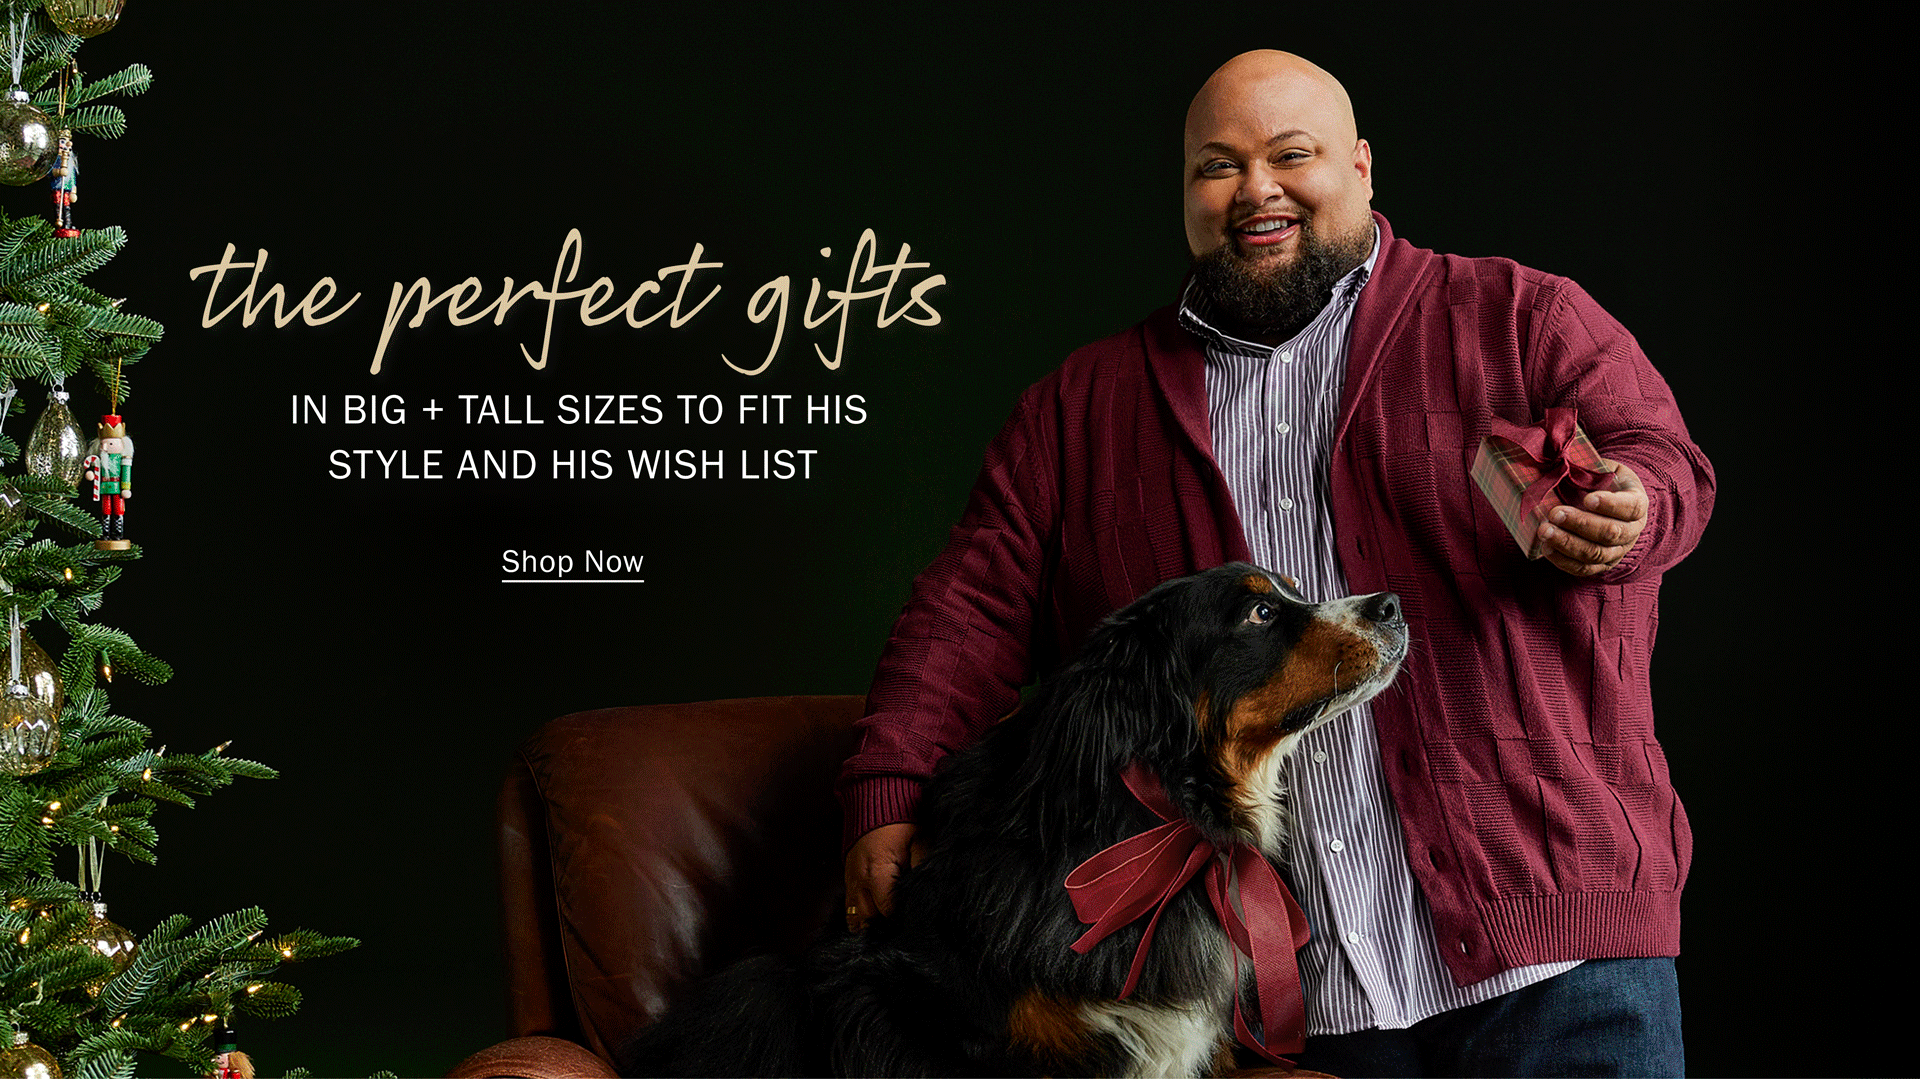 YOU’LL FIND ALL the perfect gifts IN BIG + TALL SIZES TO FIT HIS STYLE AND HIS WISH LIST Shop Now